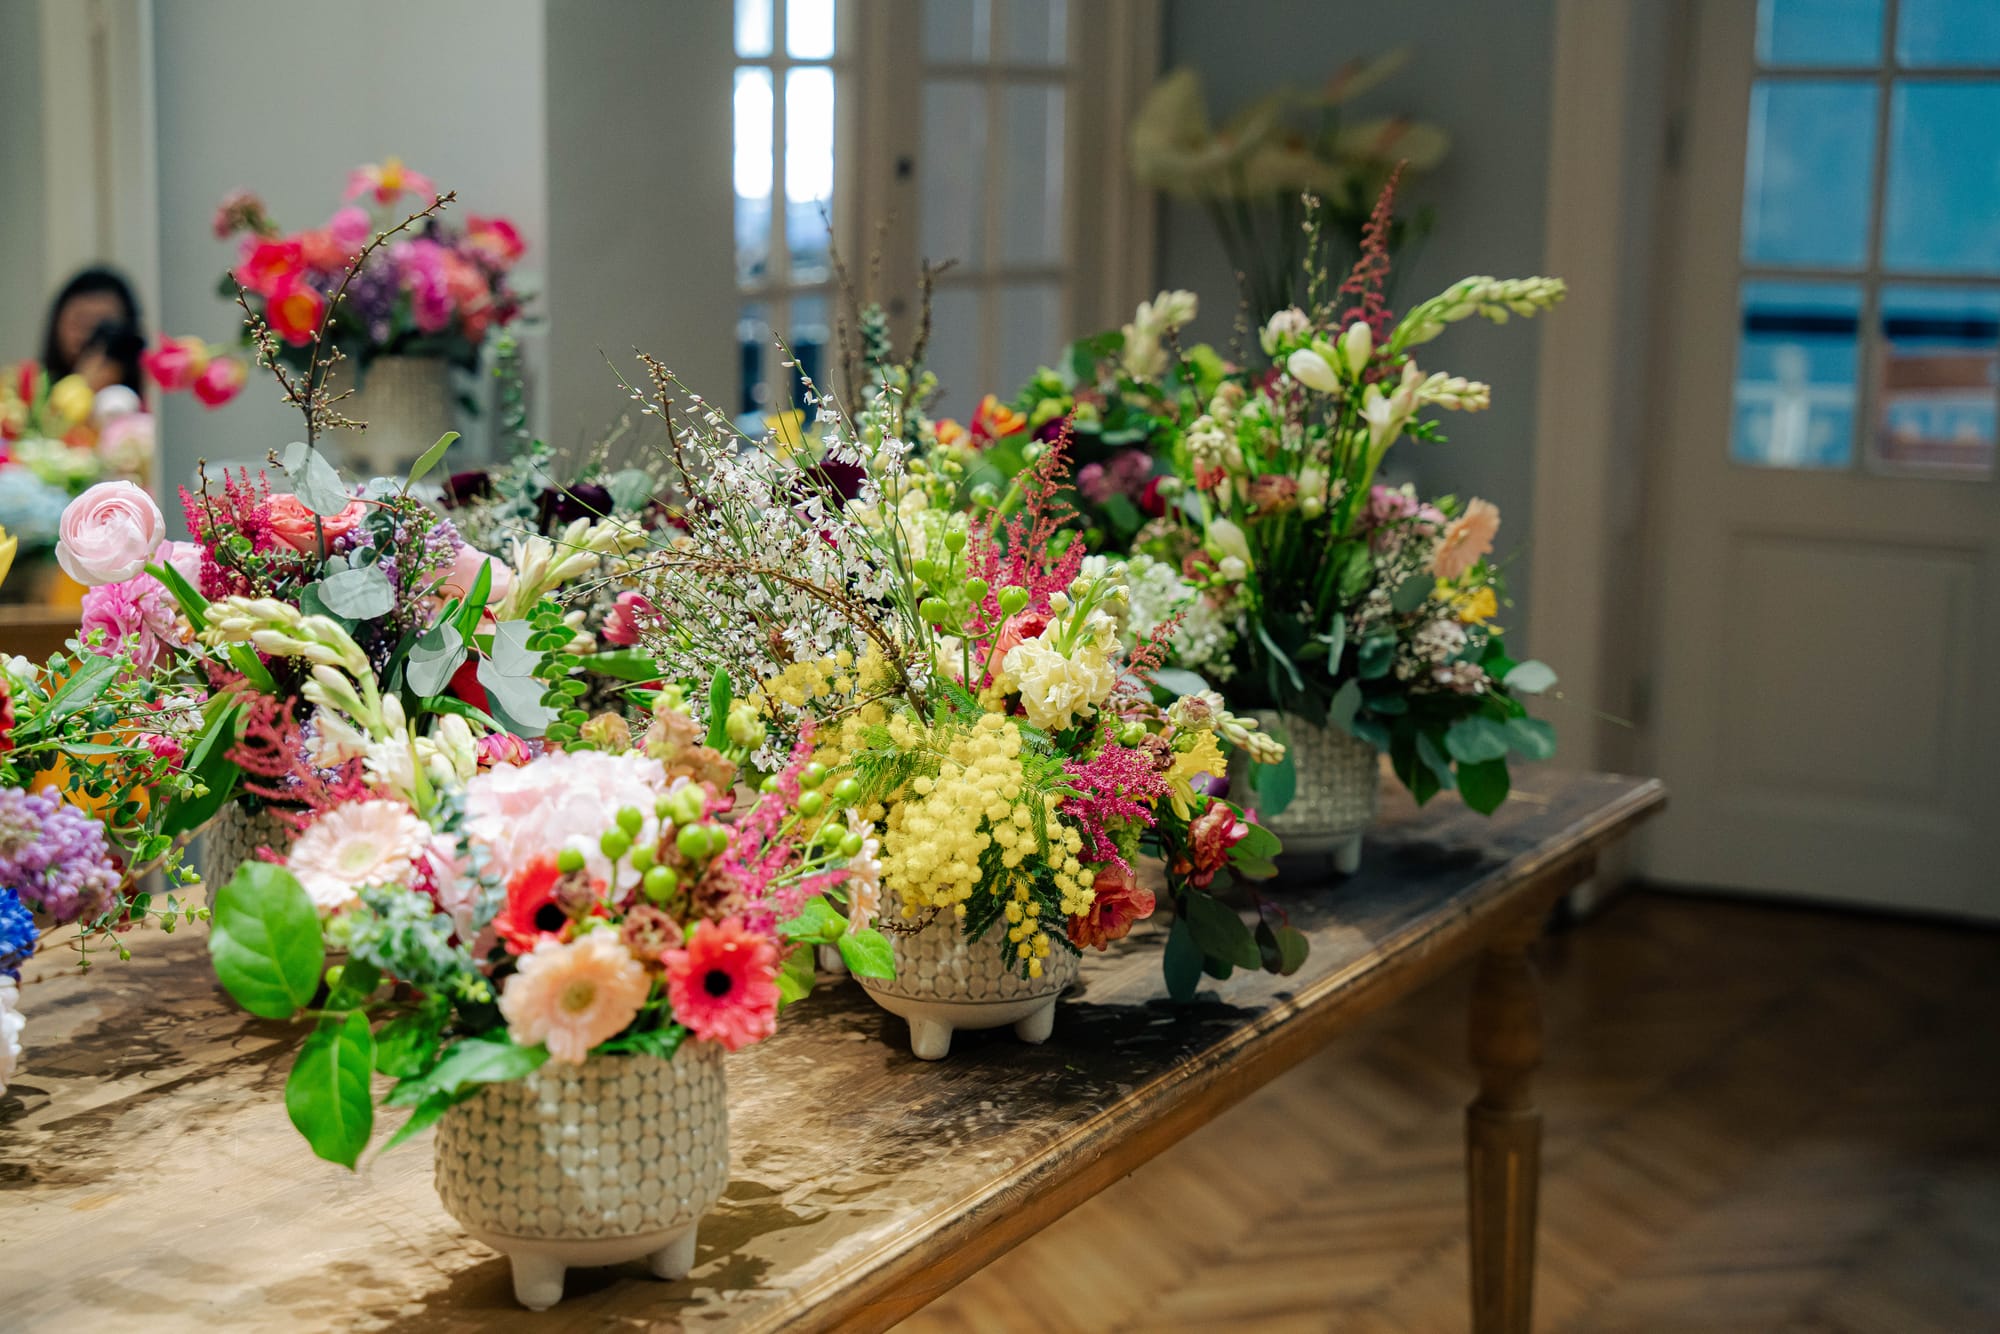 The Blooming After 30s Flower Workshop was a blast